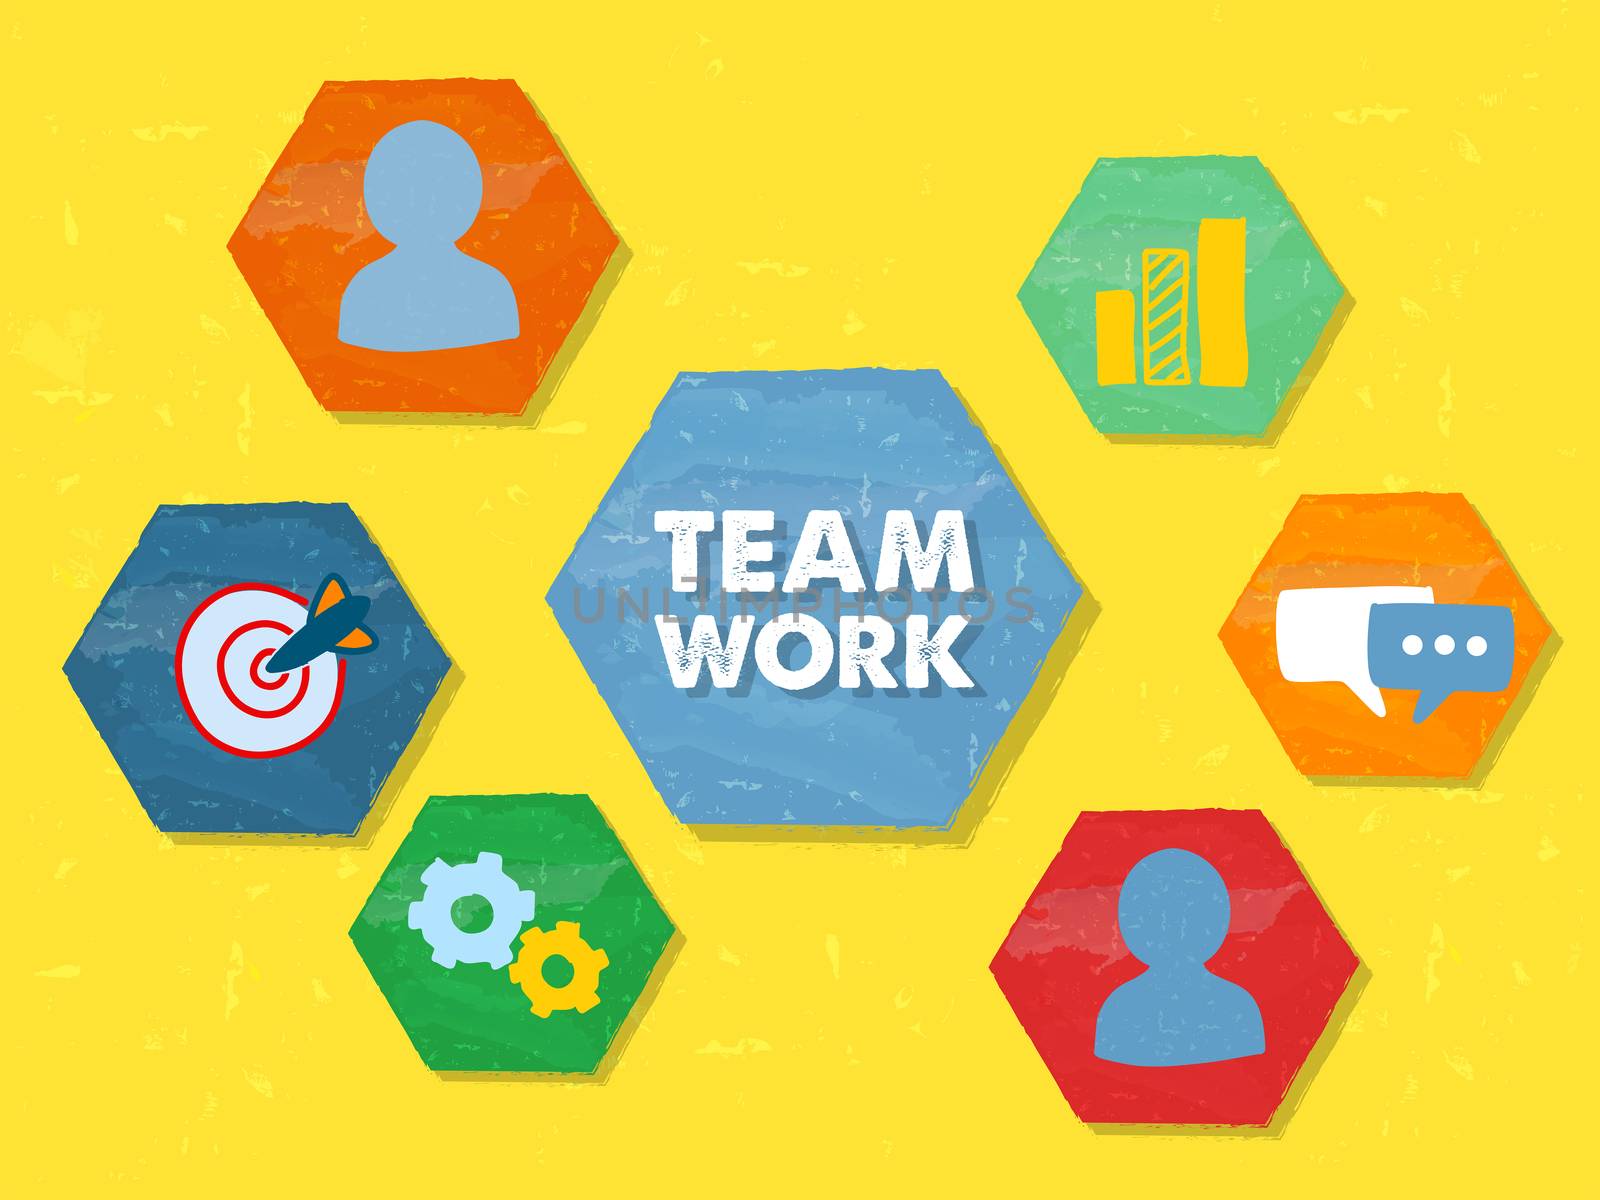 teamwork and symbols and person signs in hexagons over yellow background, grunge flat design, business team building concept